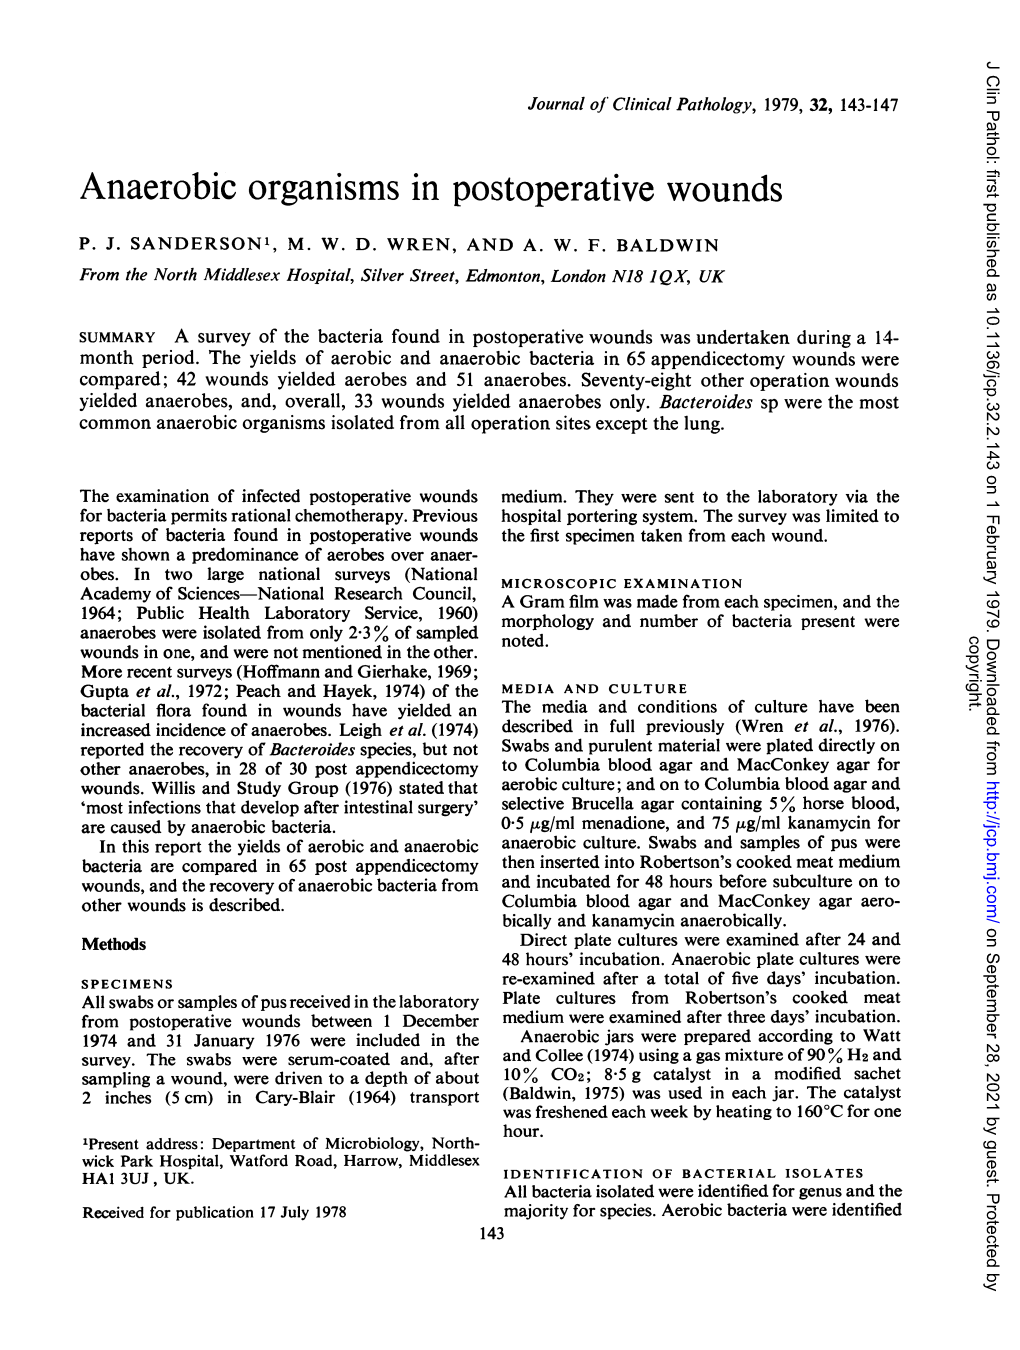 Anaerobic Organisms in Postoperative Wounds